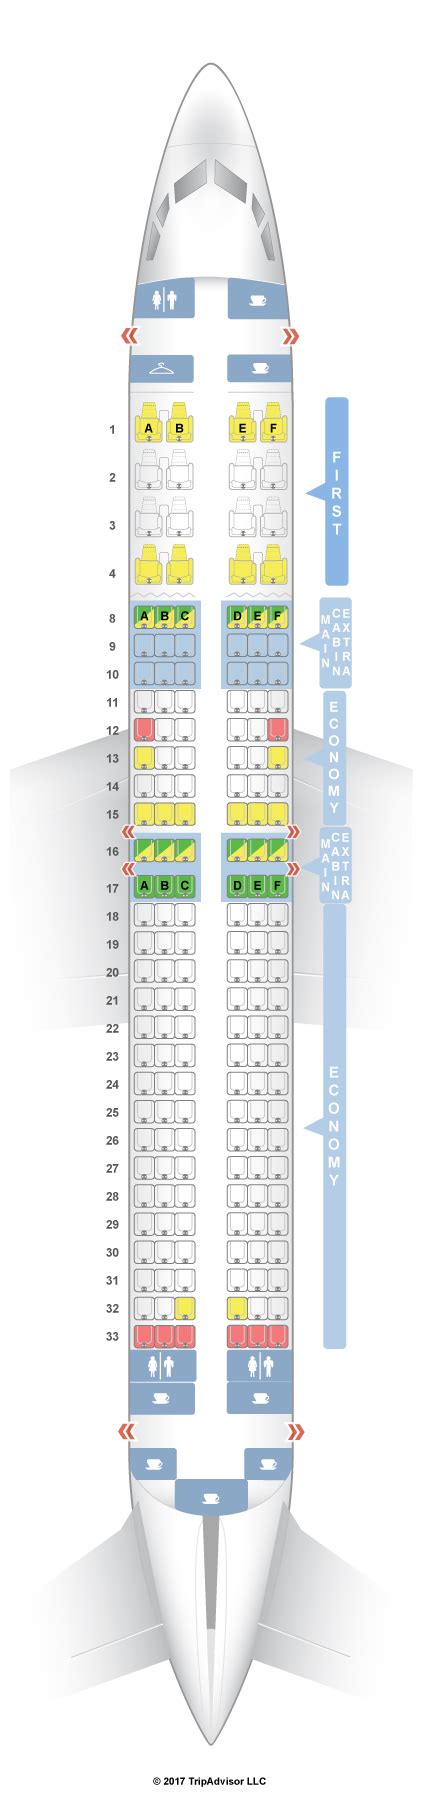 boeing 737 max 8 american airlines seat map